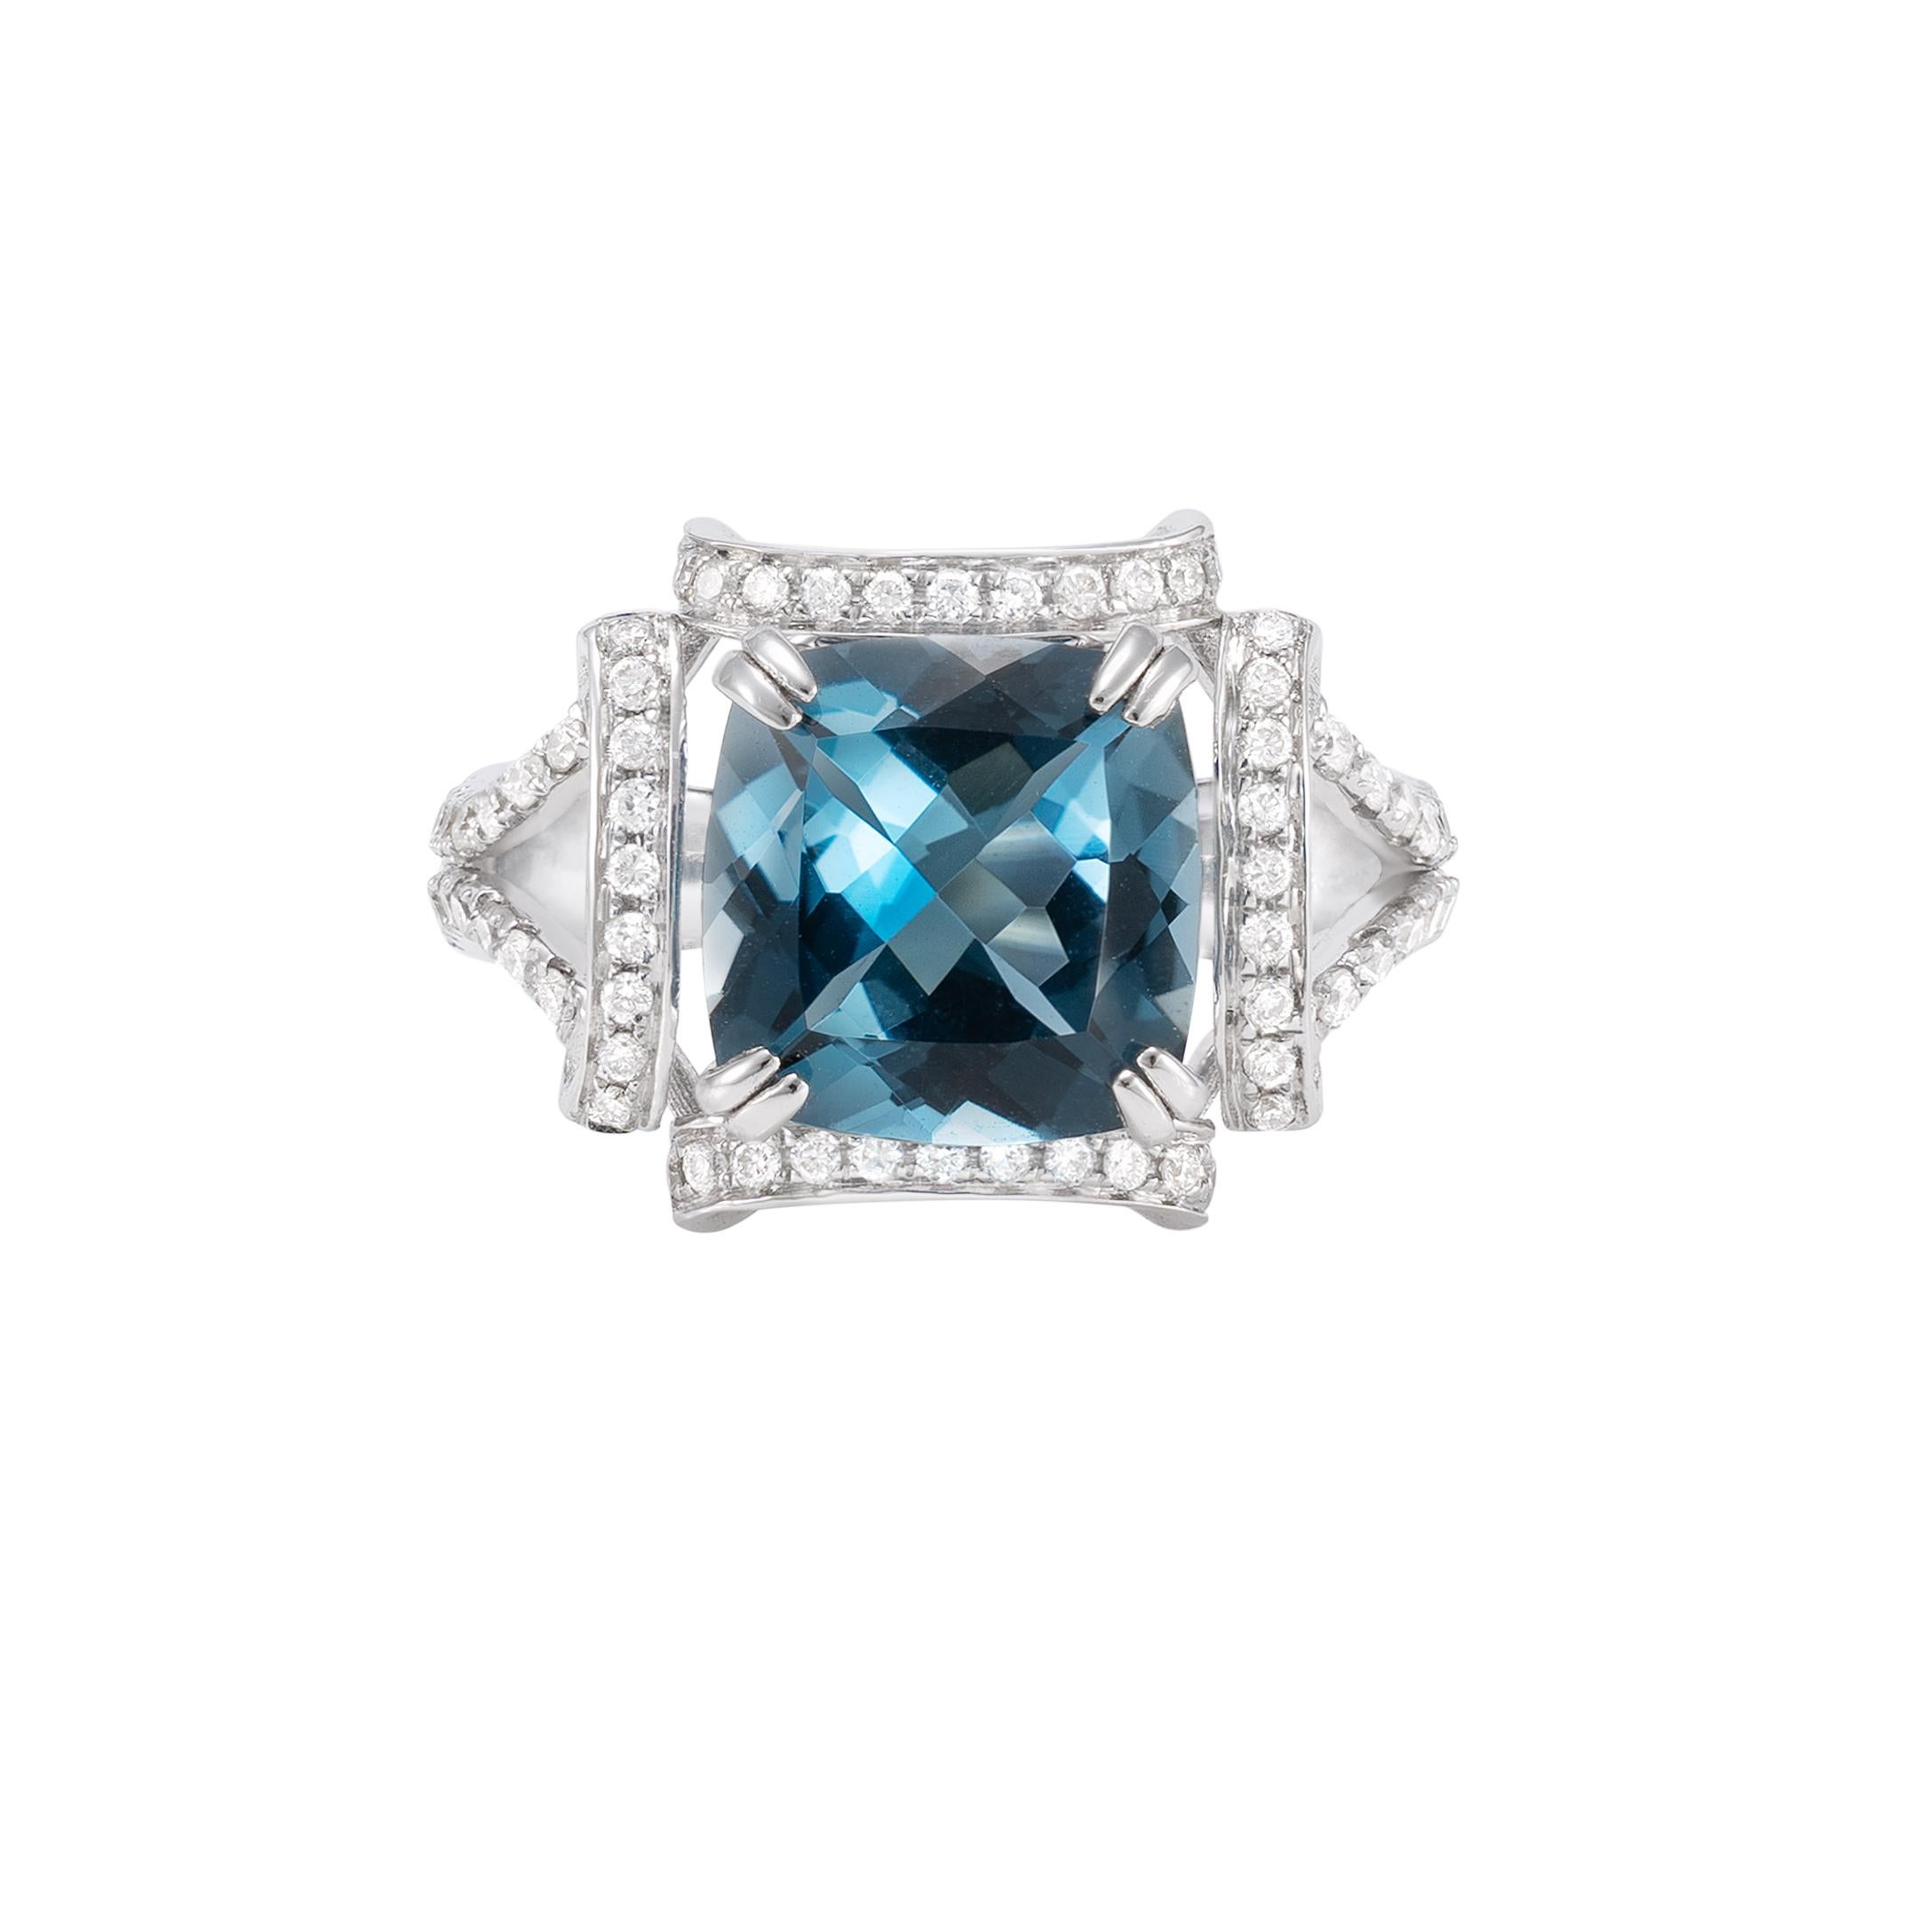 4.4 Carat London Blue Topaz Ring with Diamond in 18 Karat White Gold In New Condition For Sale In Hong Kong, HK